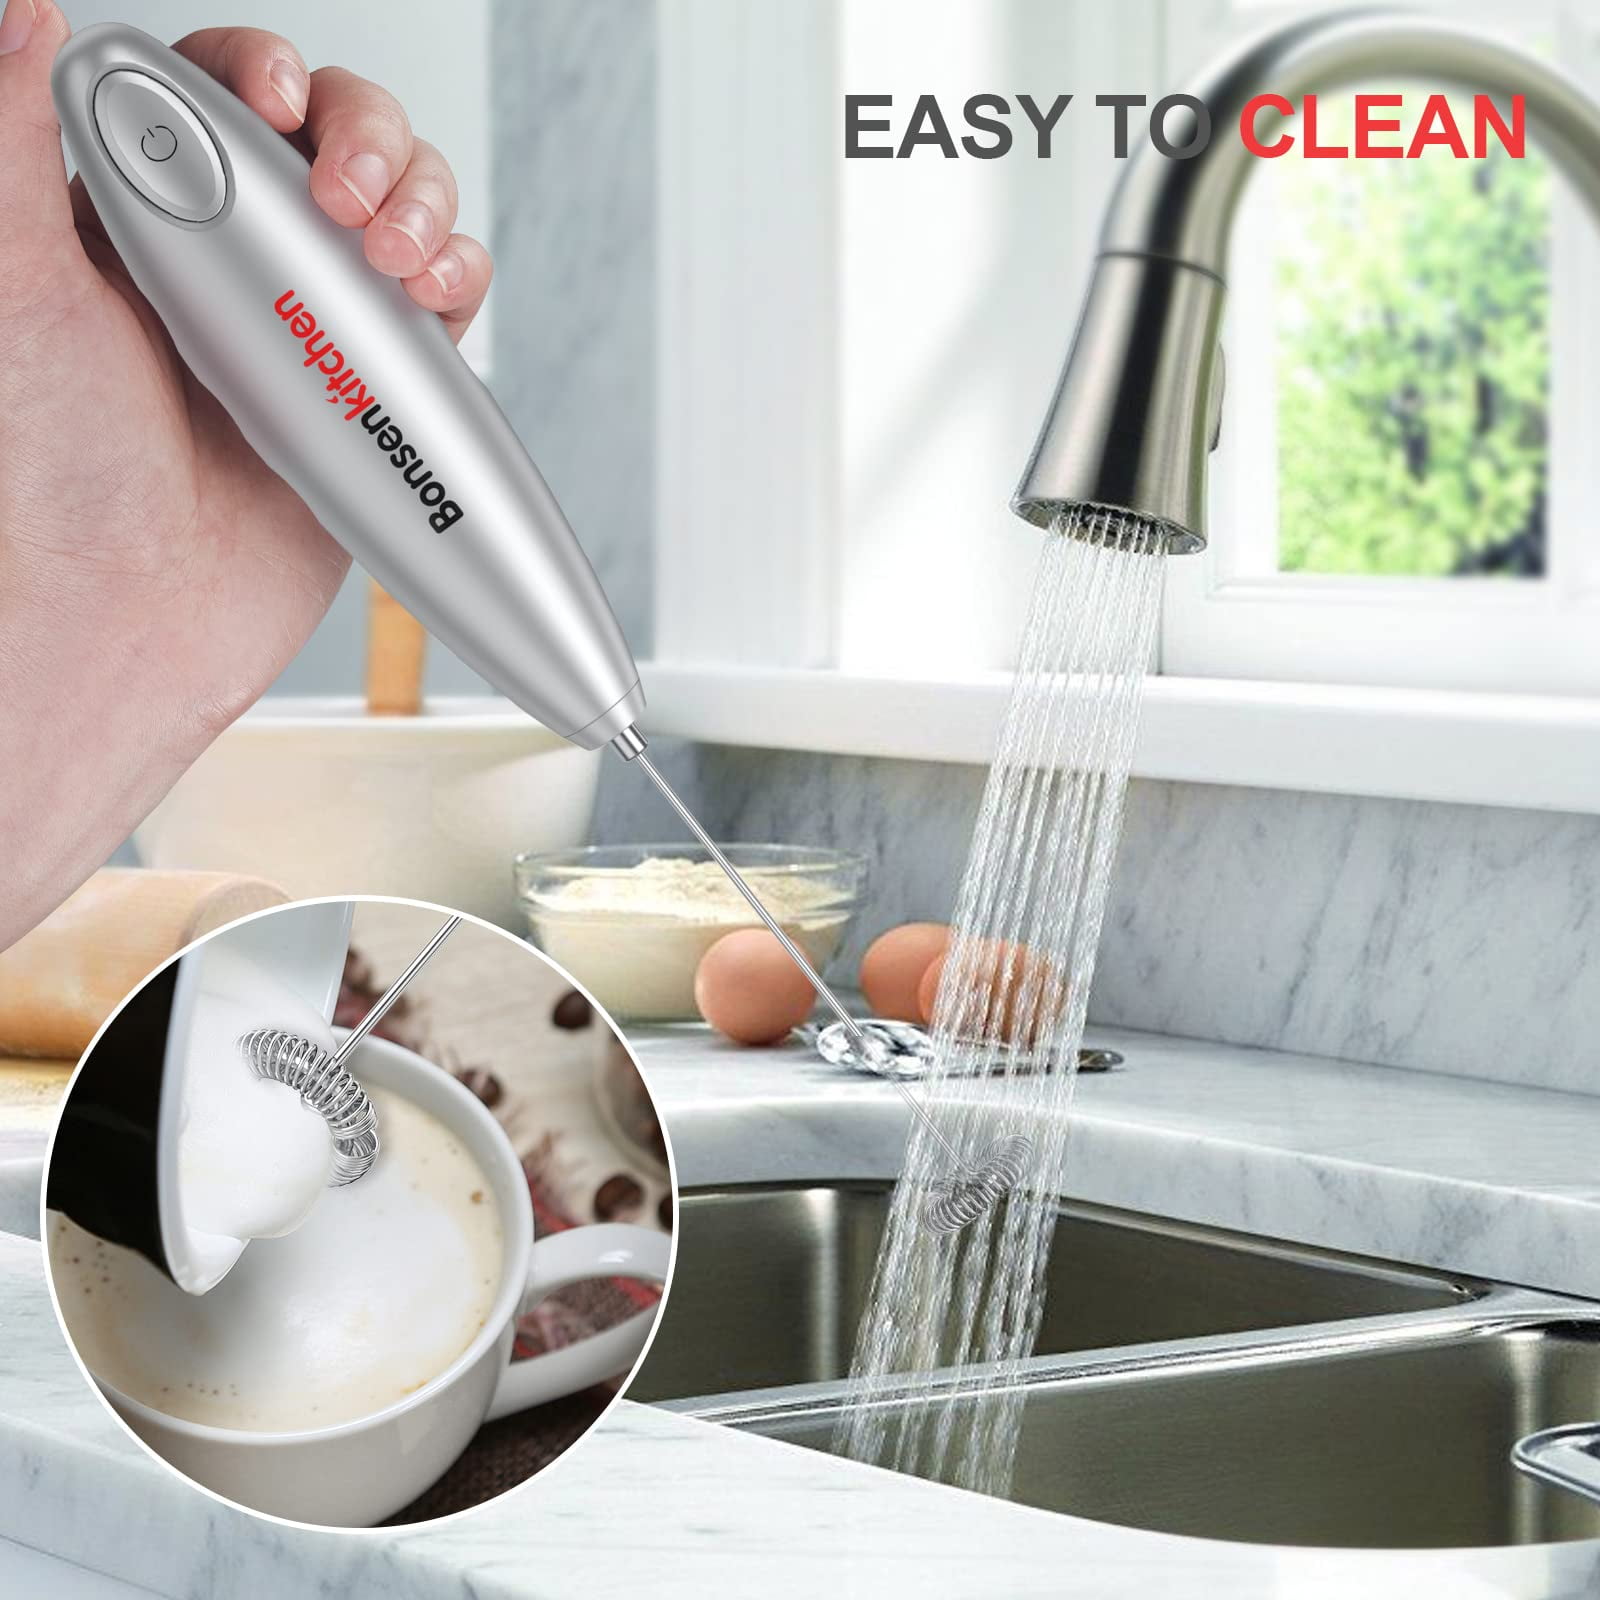 Shoppers Love the Bonsenkitchen Milk Frother